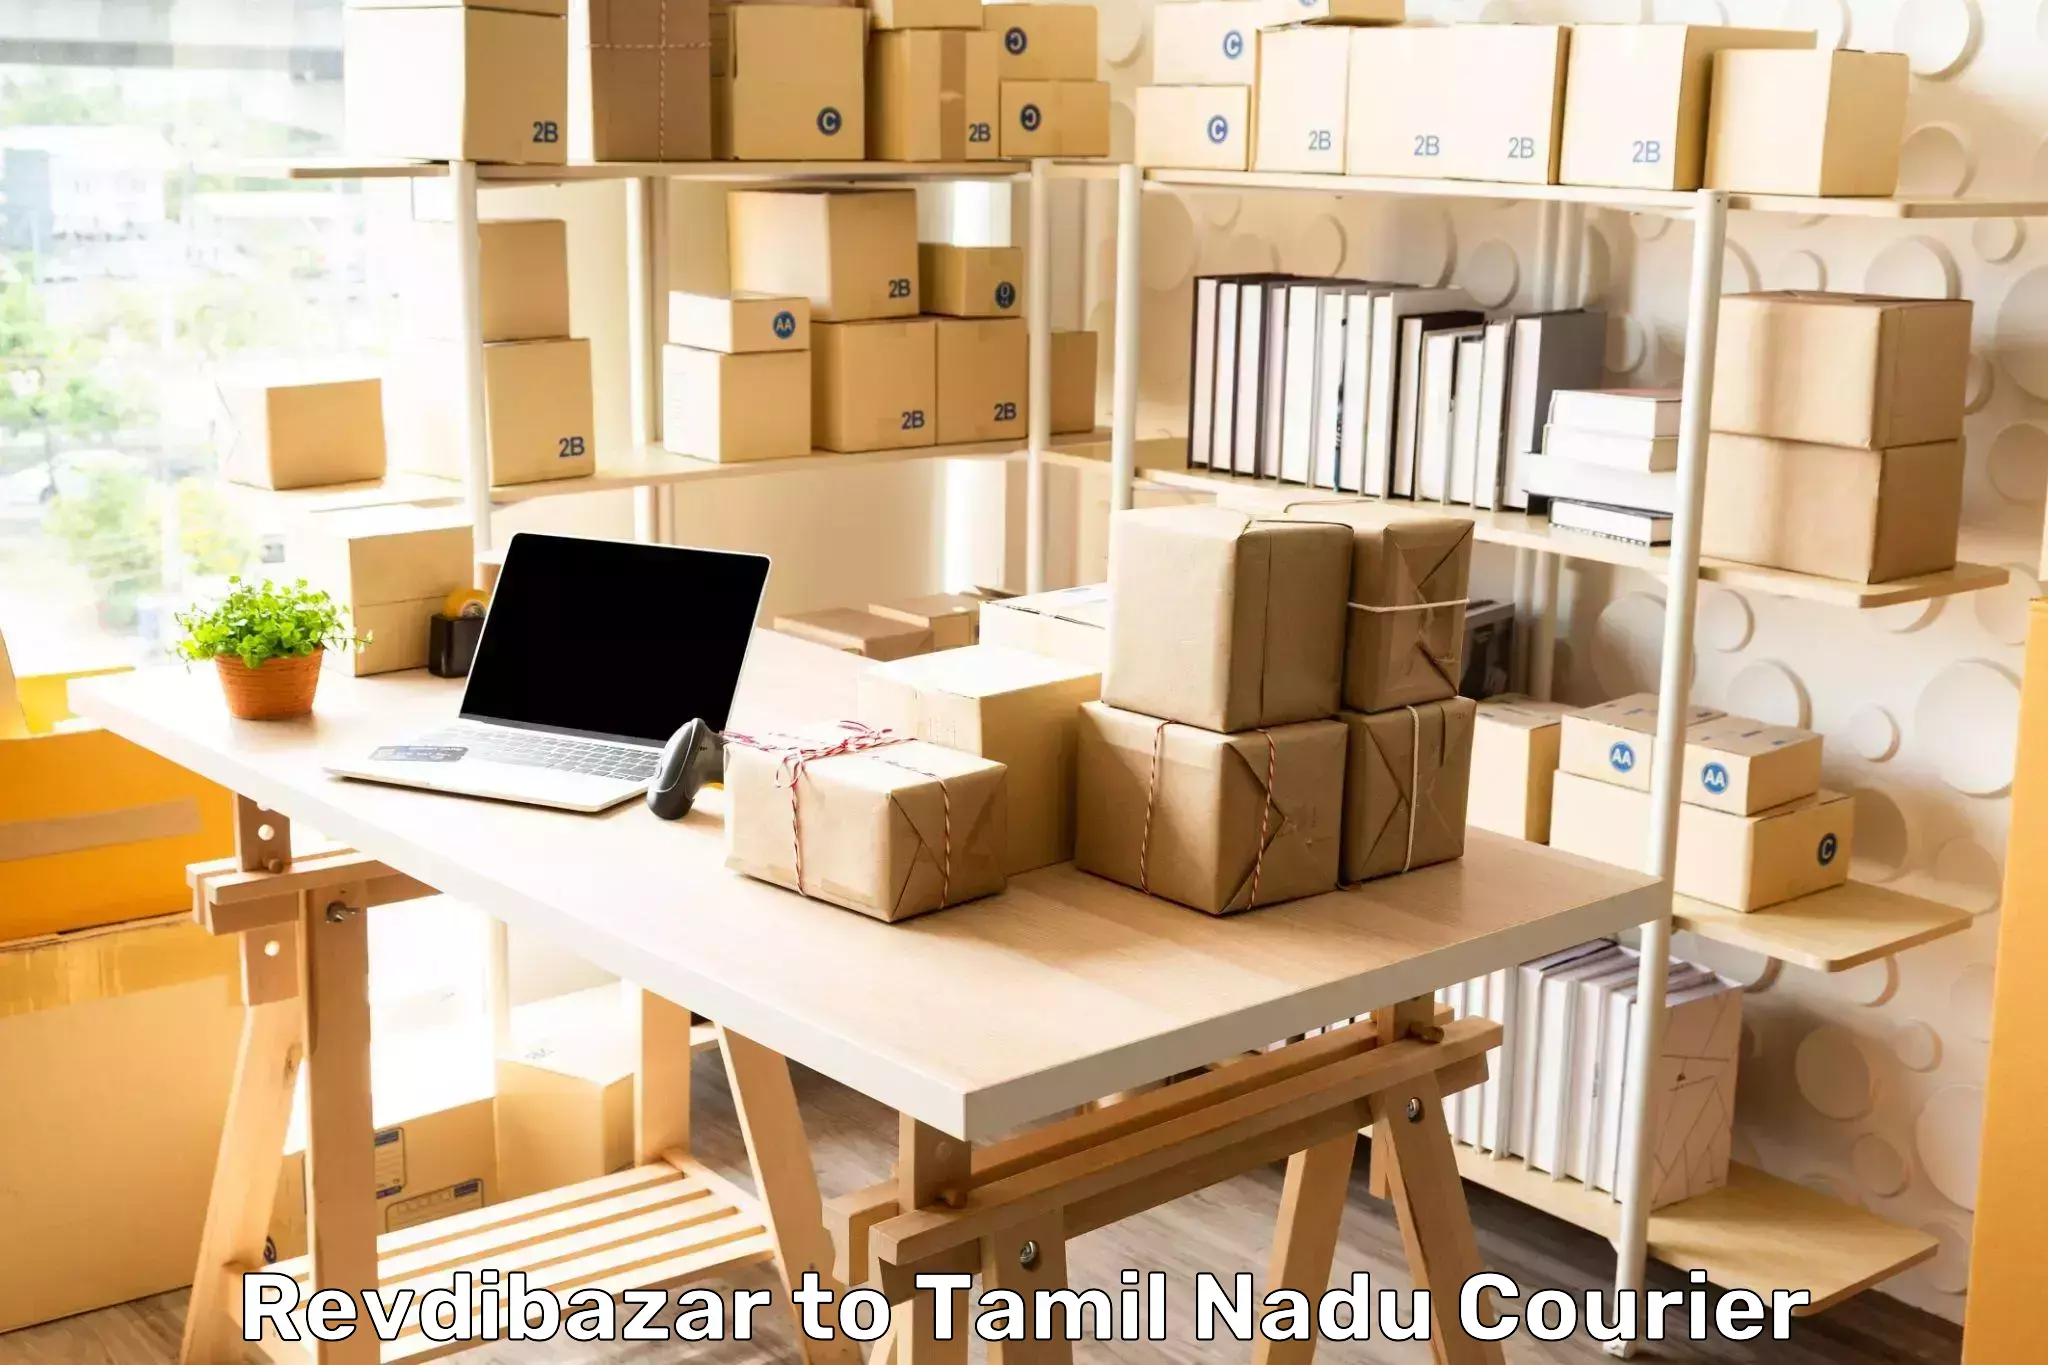 Courier service efficiency Revdibazar to Ennore Port Chennai